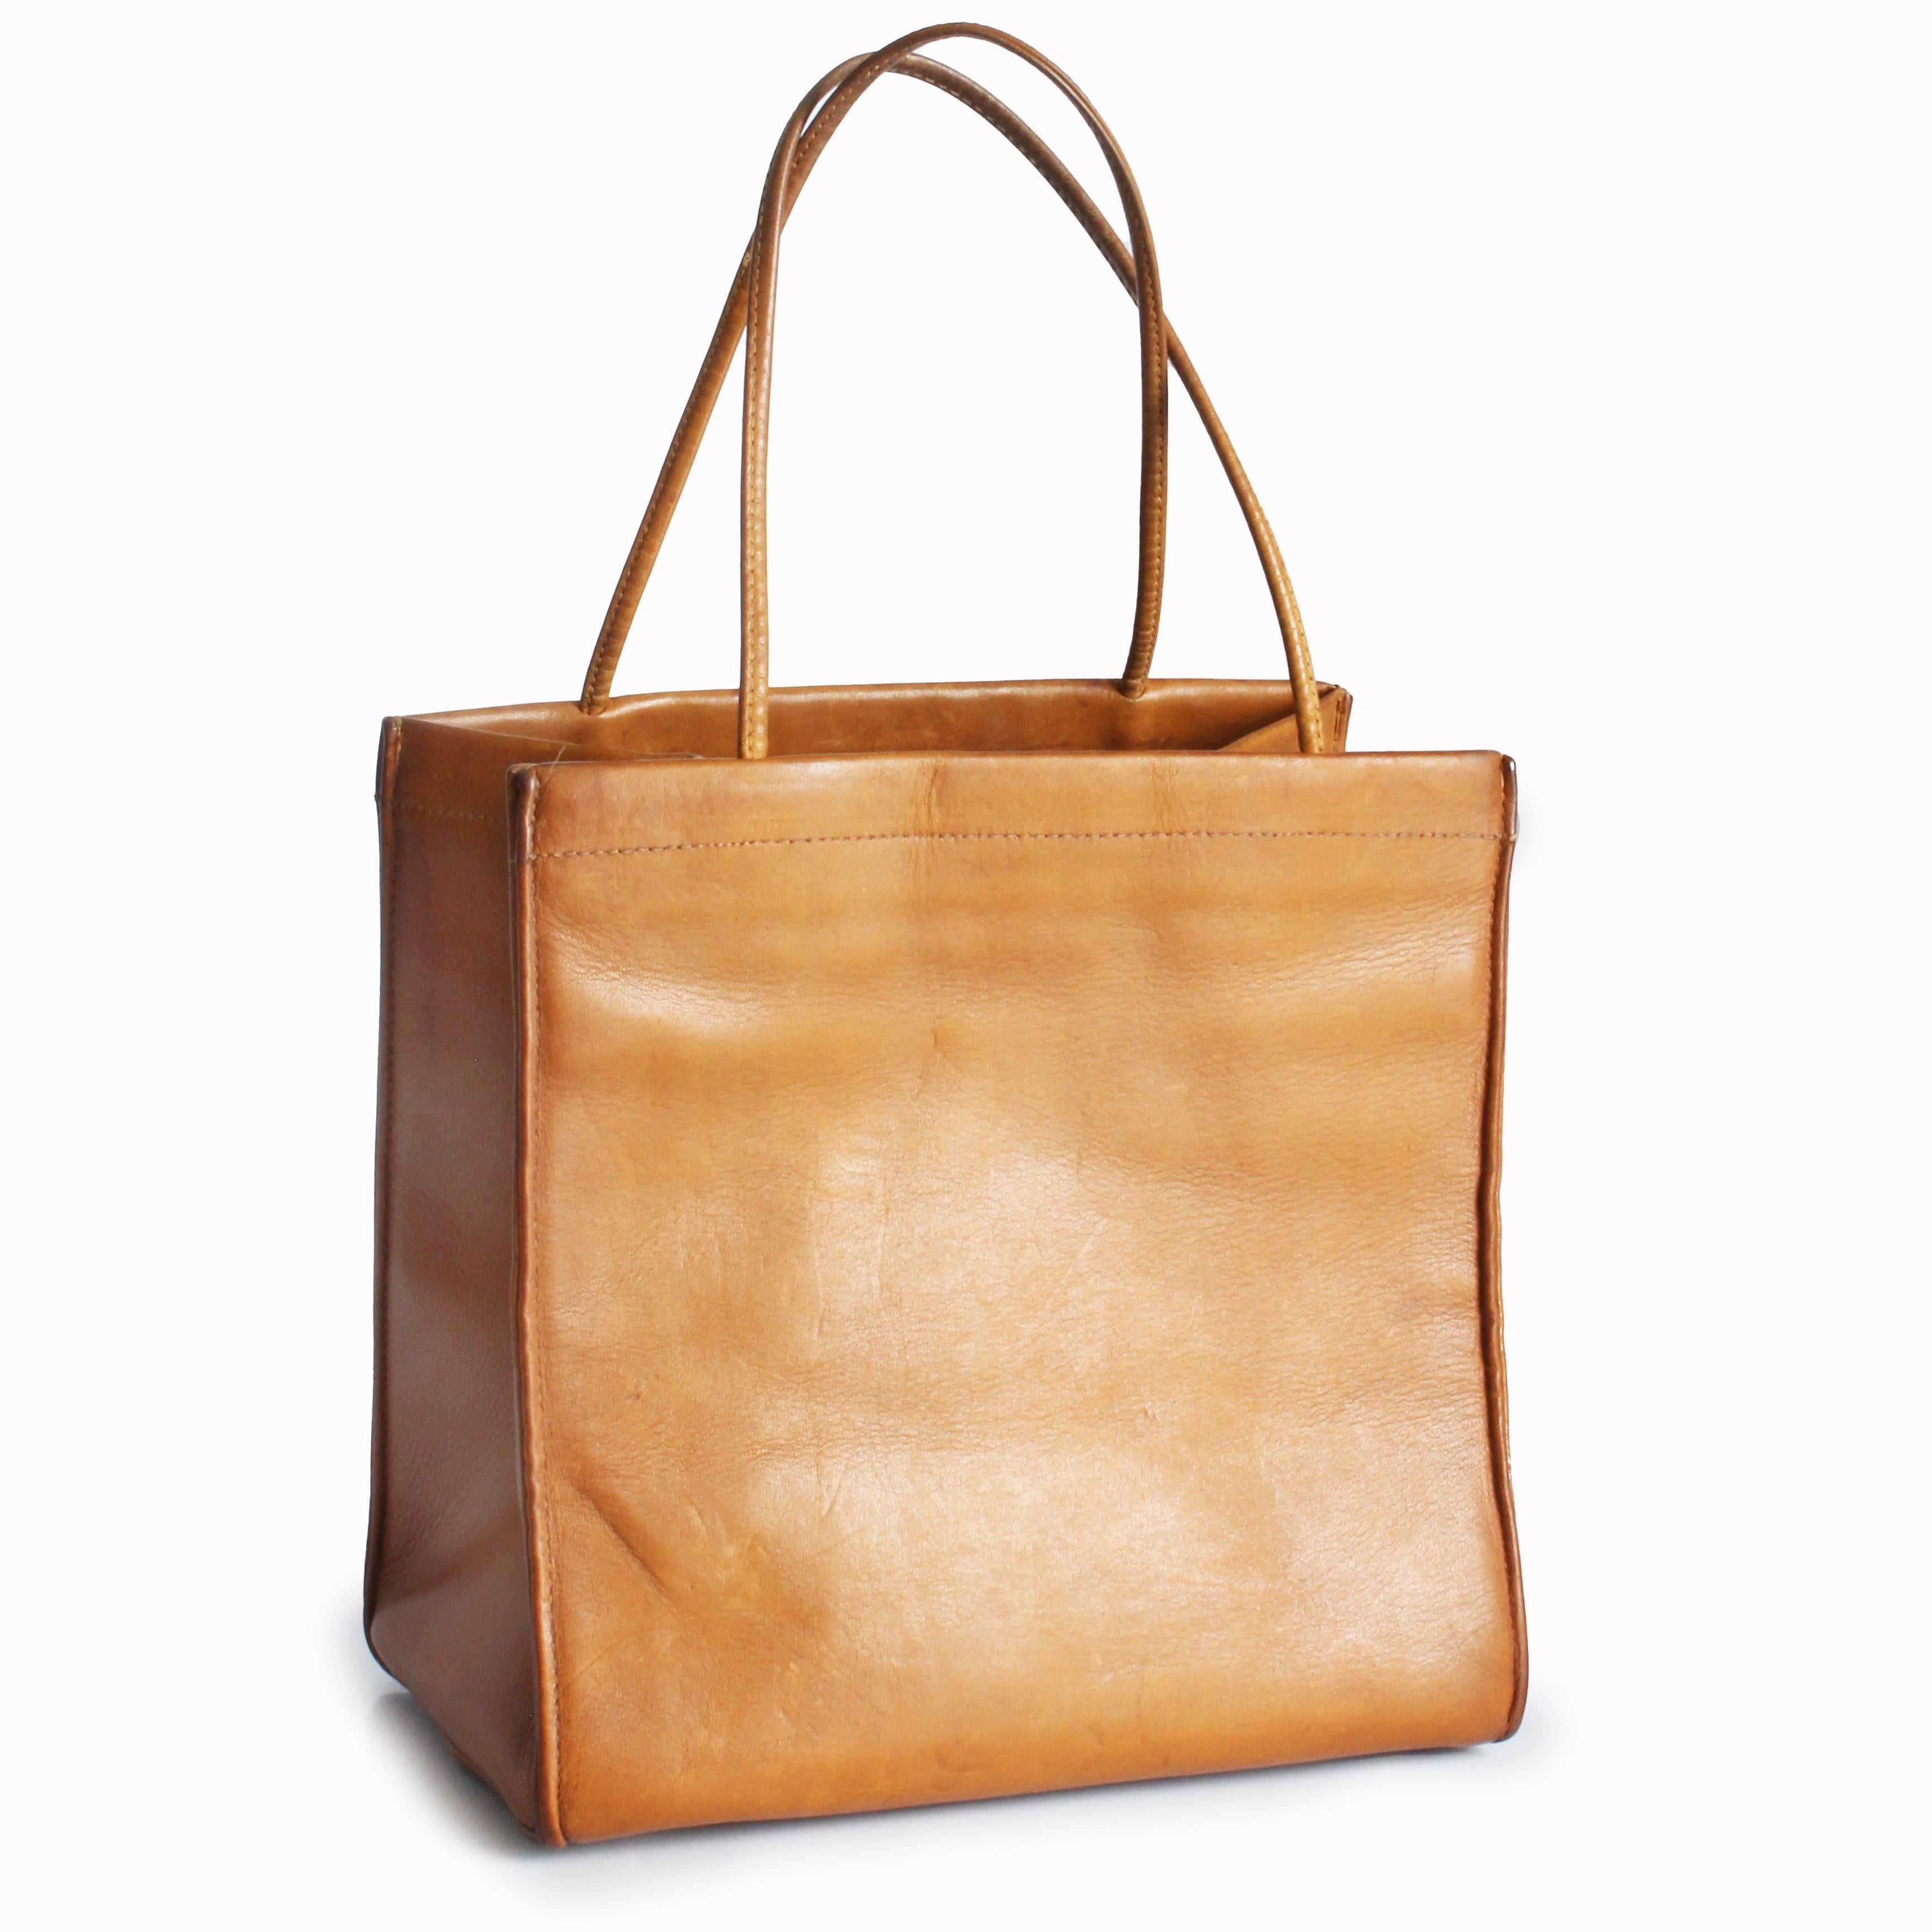 Preowned, vintage Bonnie Cashin for Coach 'lunch bag' tote, likely made in the 1960s.  Made from a smooth tan harness leather, it's shaped like a paper bag and designed to fold flat for storage! The interior is lined in Cashin's signature striped